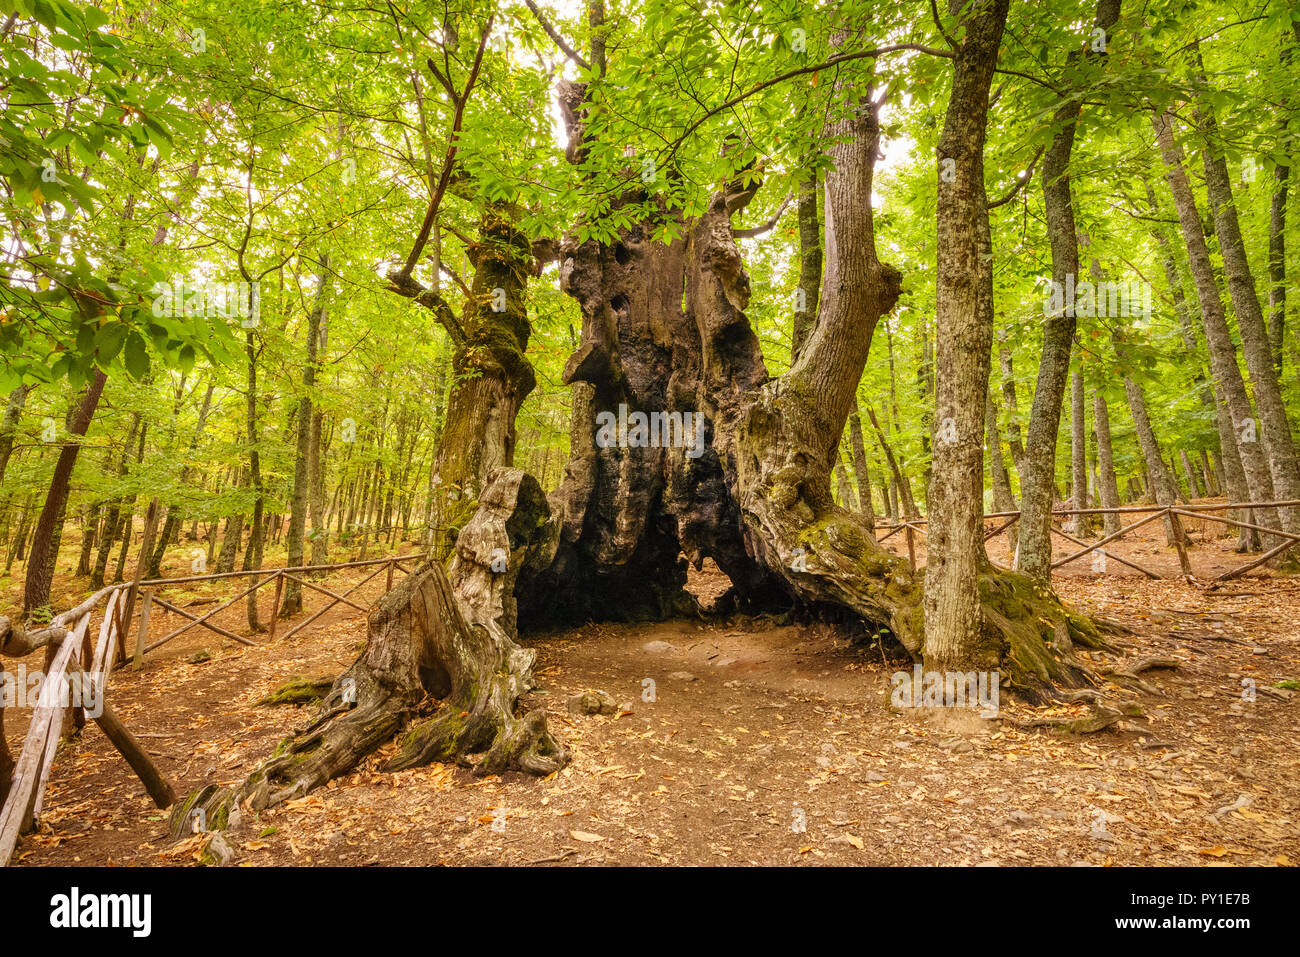 The Castanar de El Tiemblo is a protected area in central Spain where the chestnut trees are the main attraction. Stock Photo